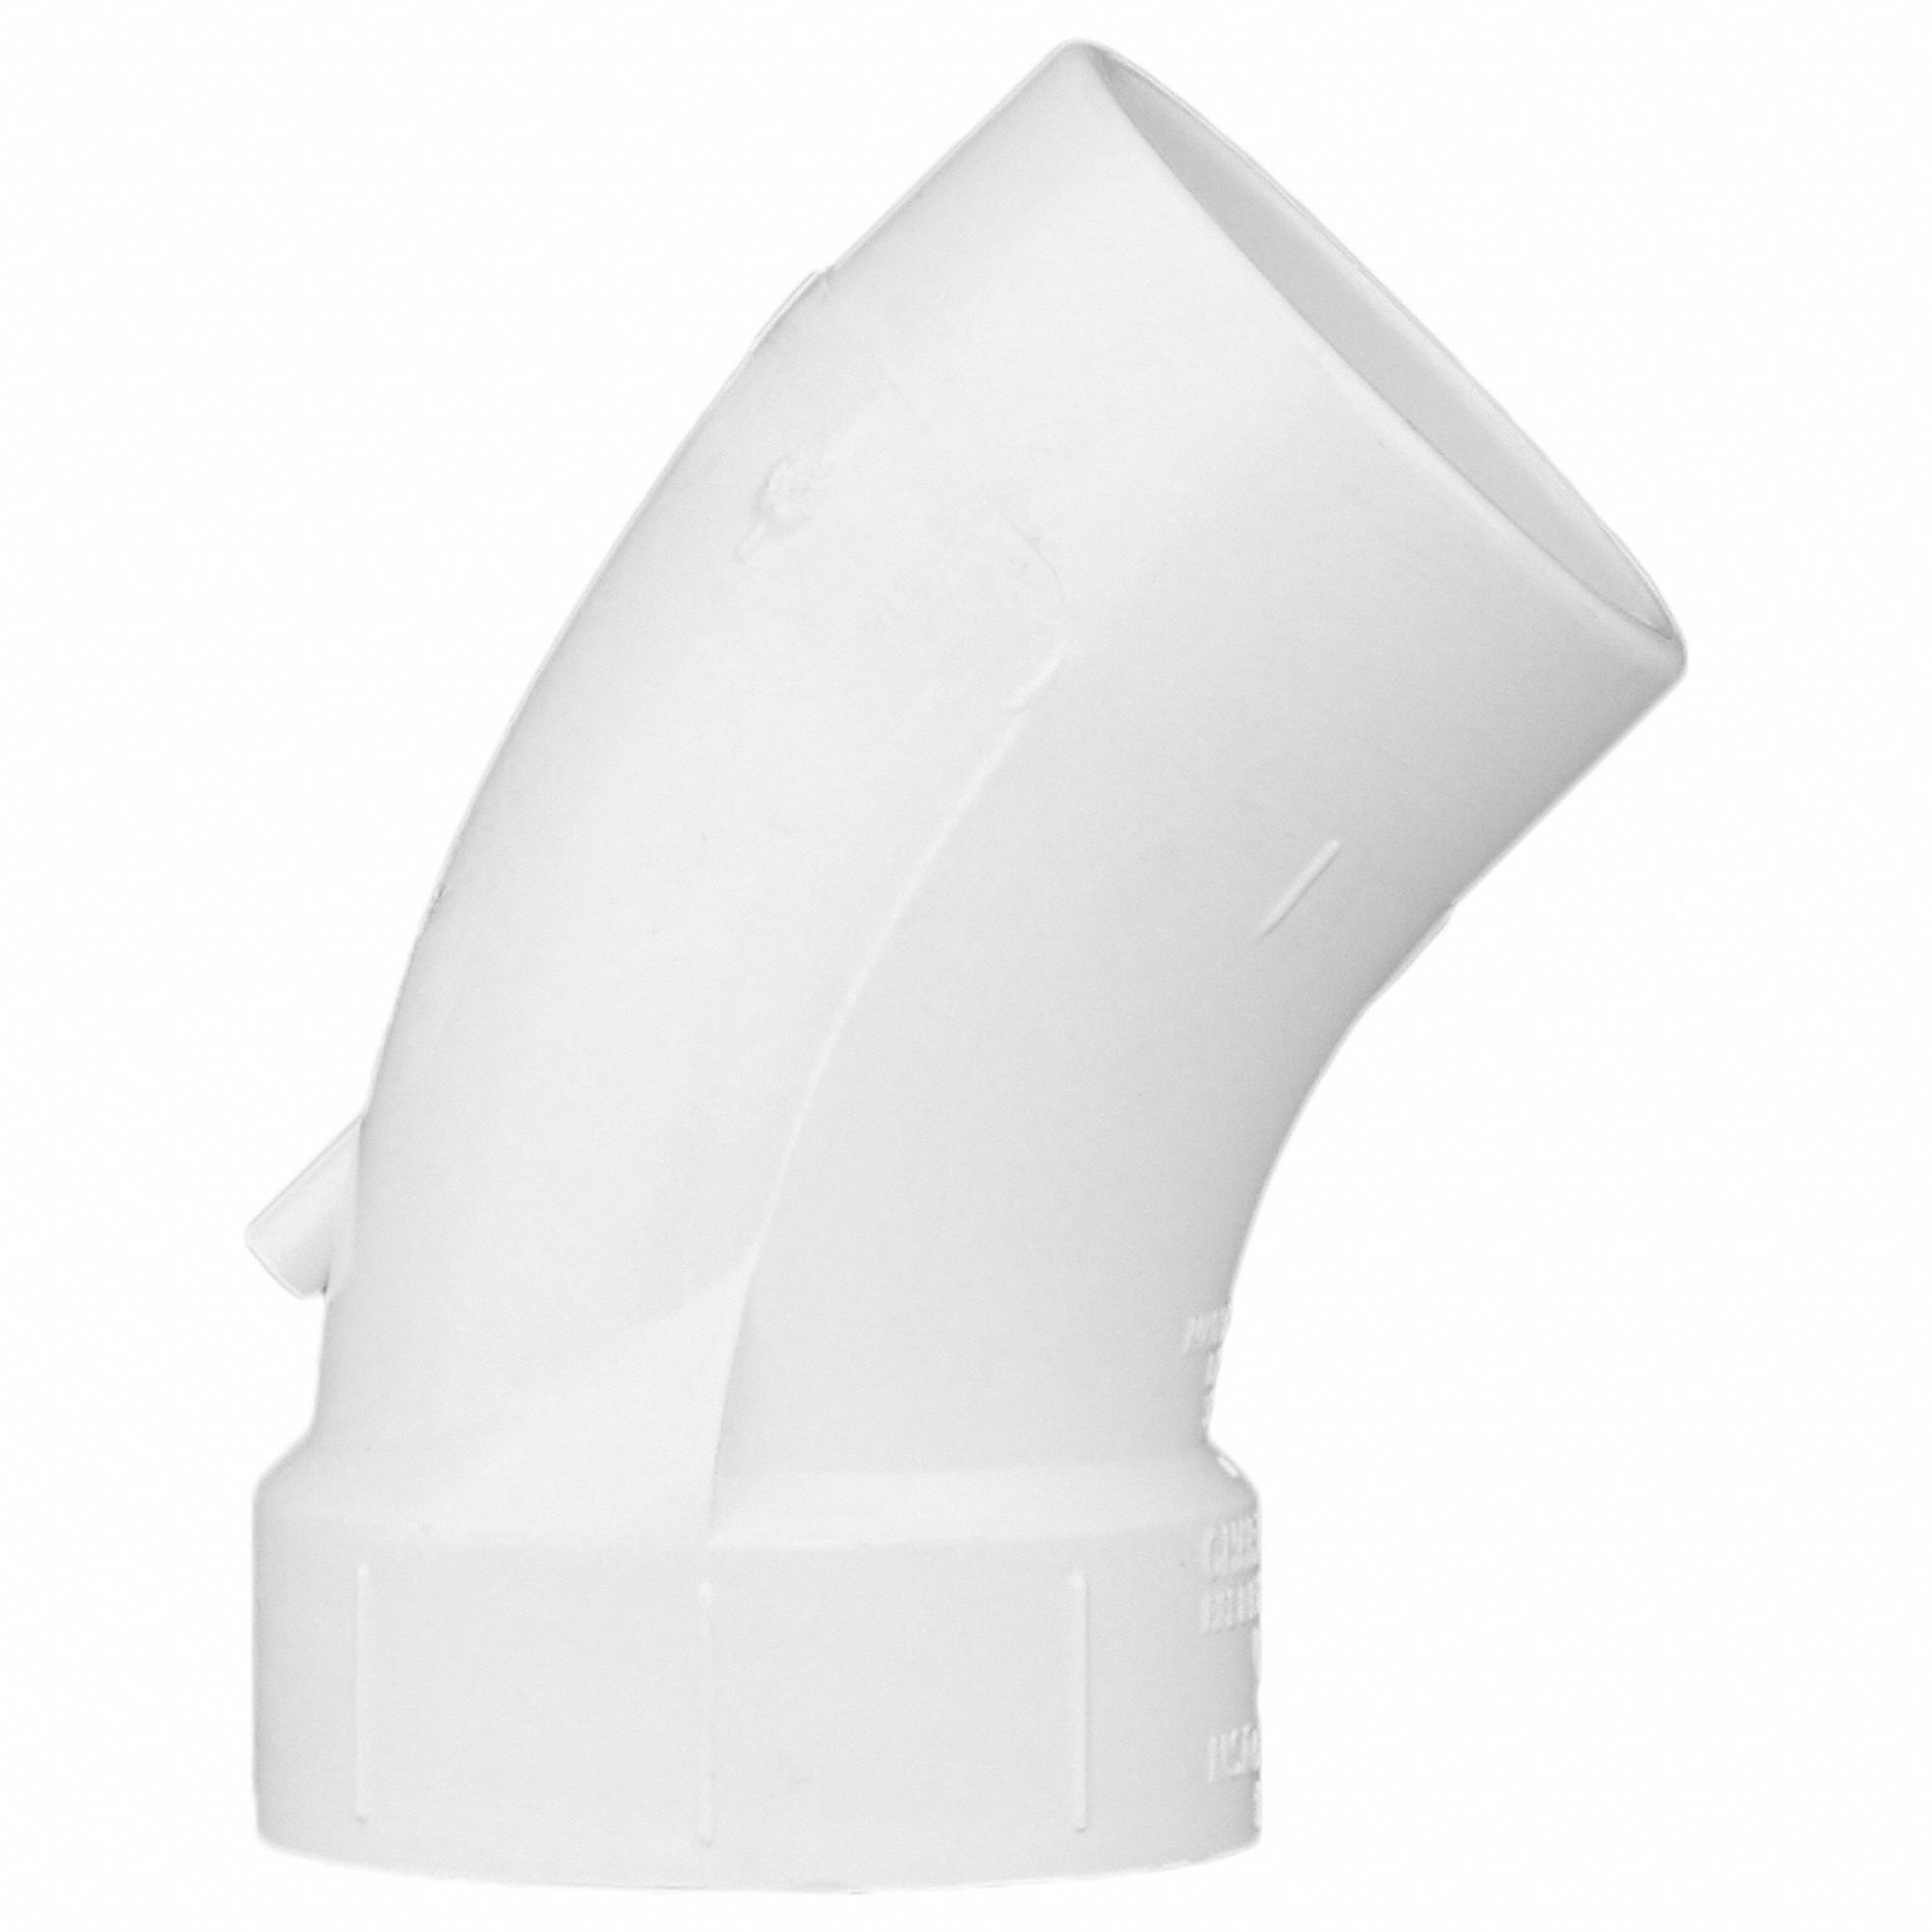 GRAINGER APPROVED PVC Street Elbow, 45 Degrees, Hub x Spigot, 2 in Pipe Size Pipe Fitting